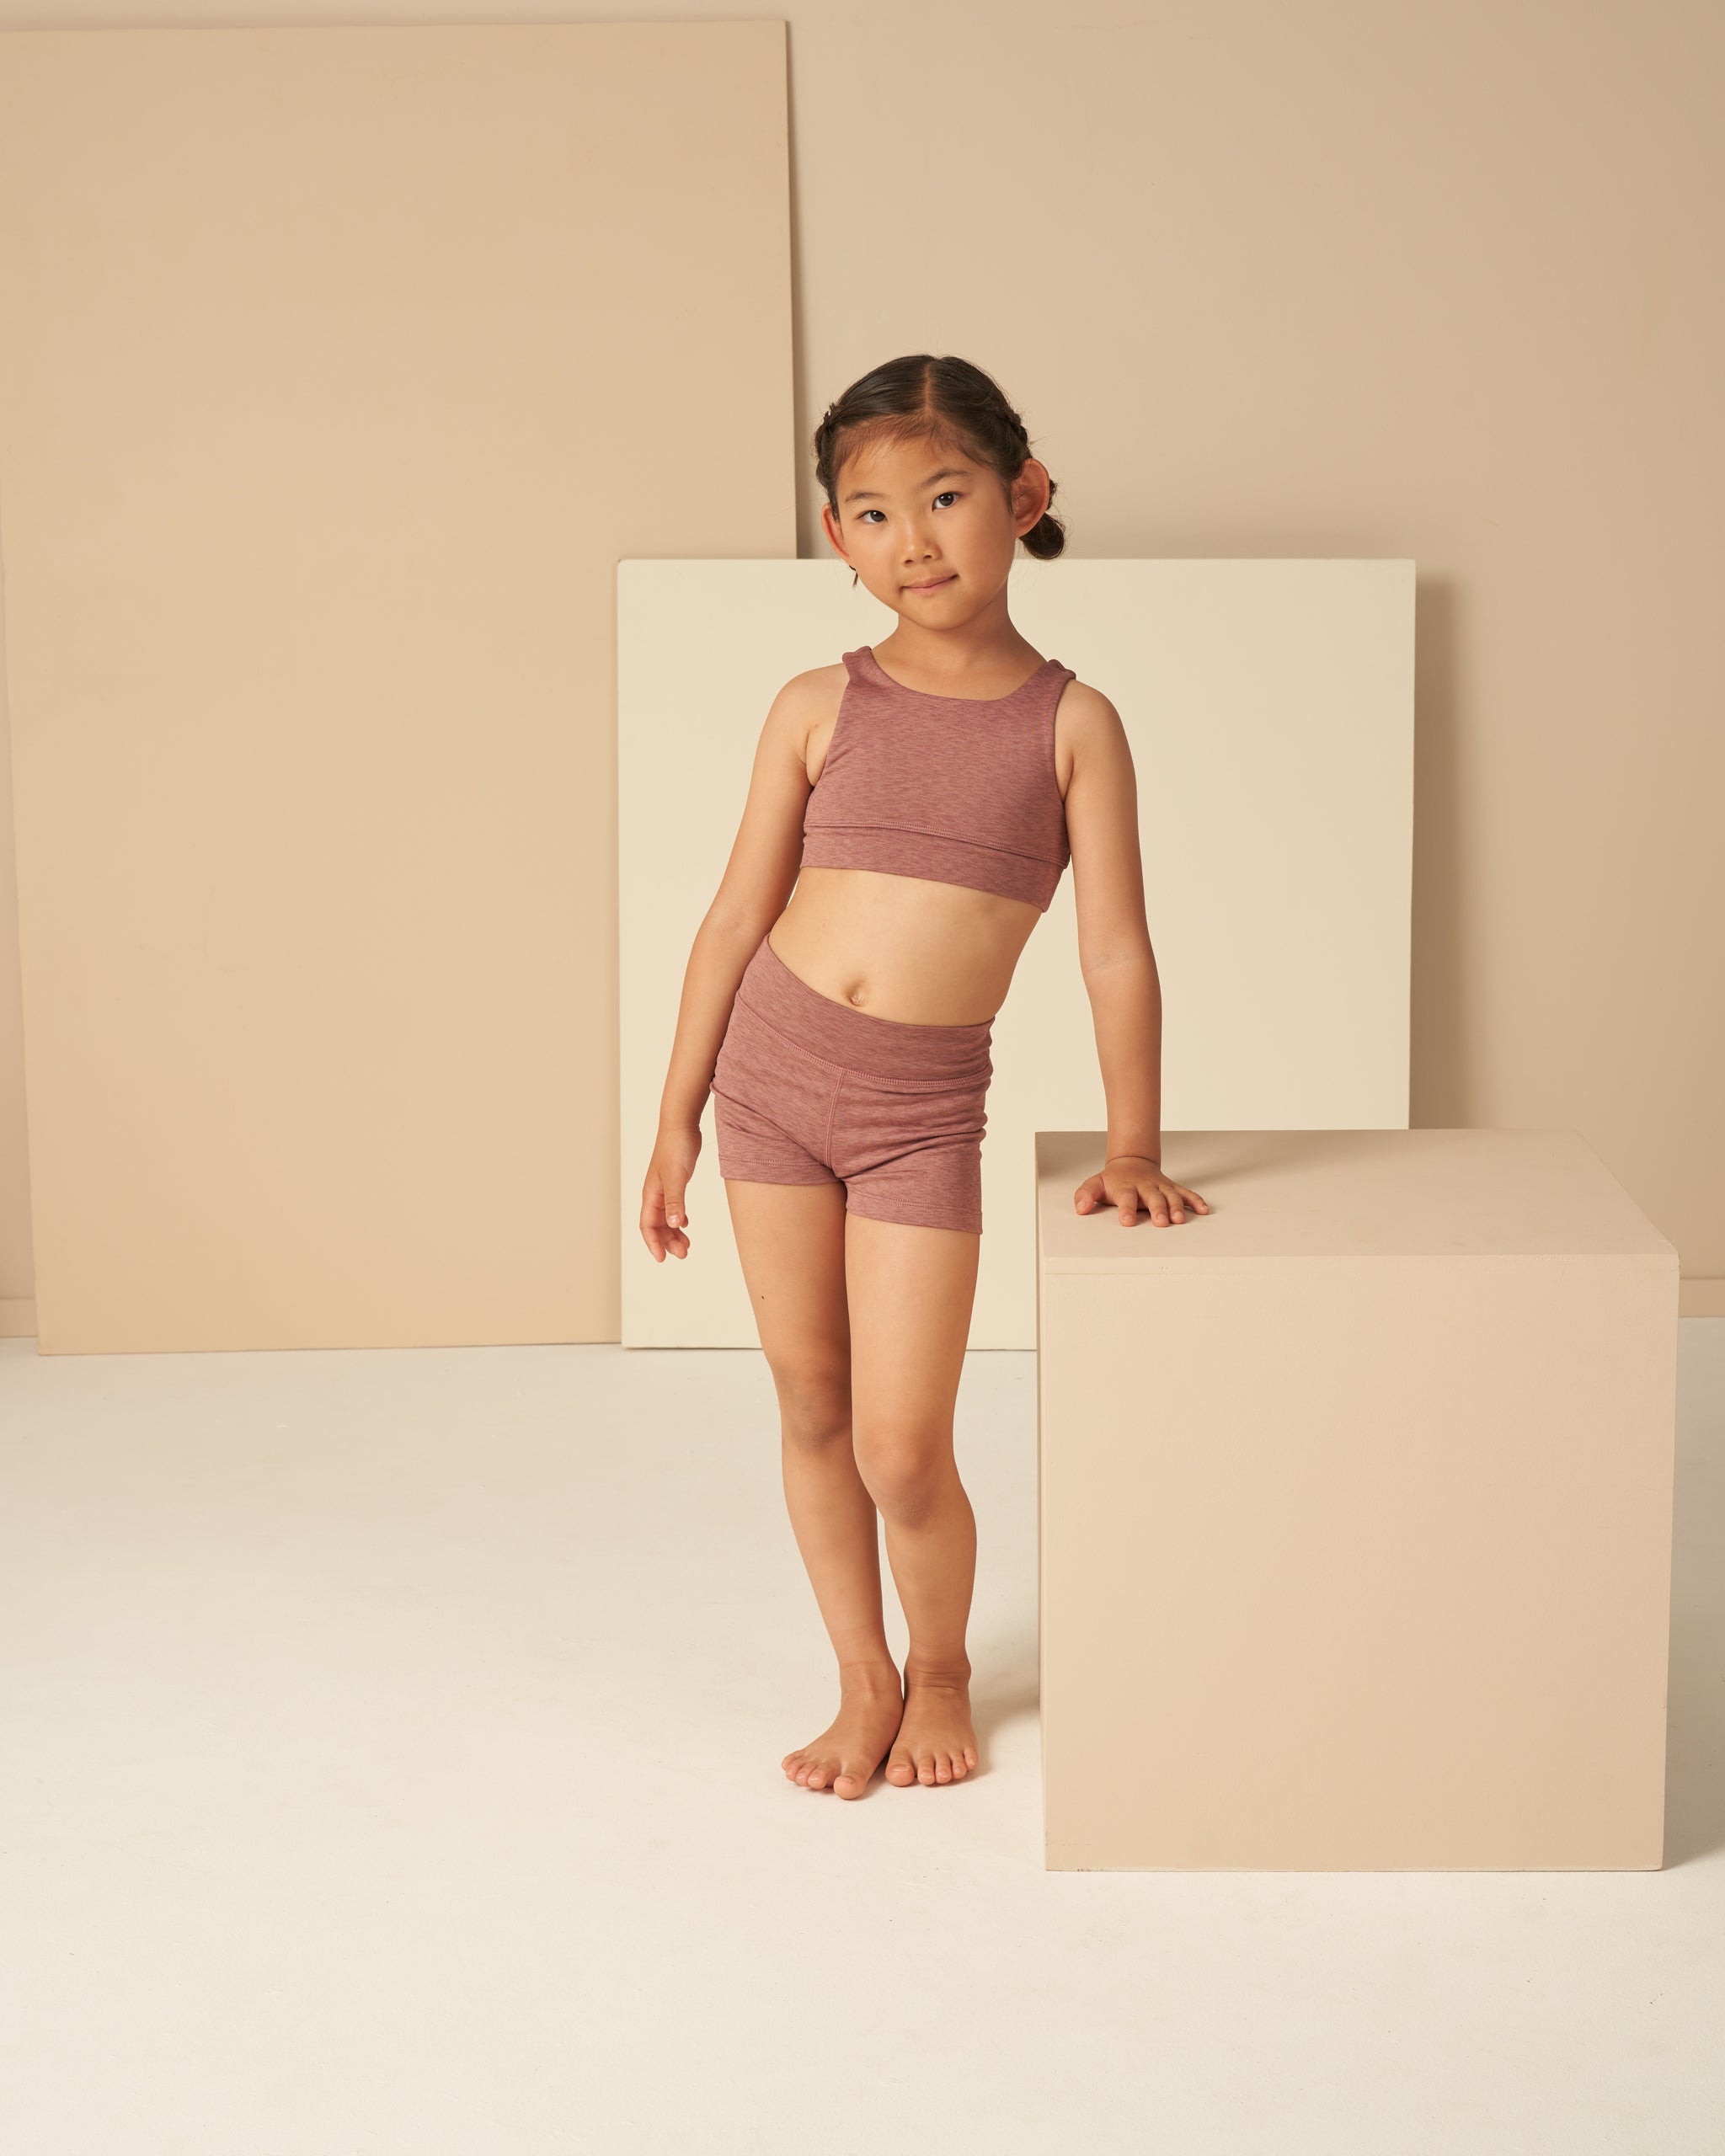 Swift Sports Bra || Heathered Mulberry - Rylee + Cru | Kids Clothes | Trendy Baby Clothes | Modern Infant Outfits |